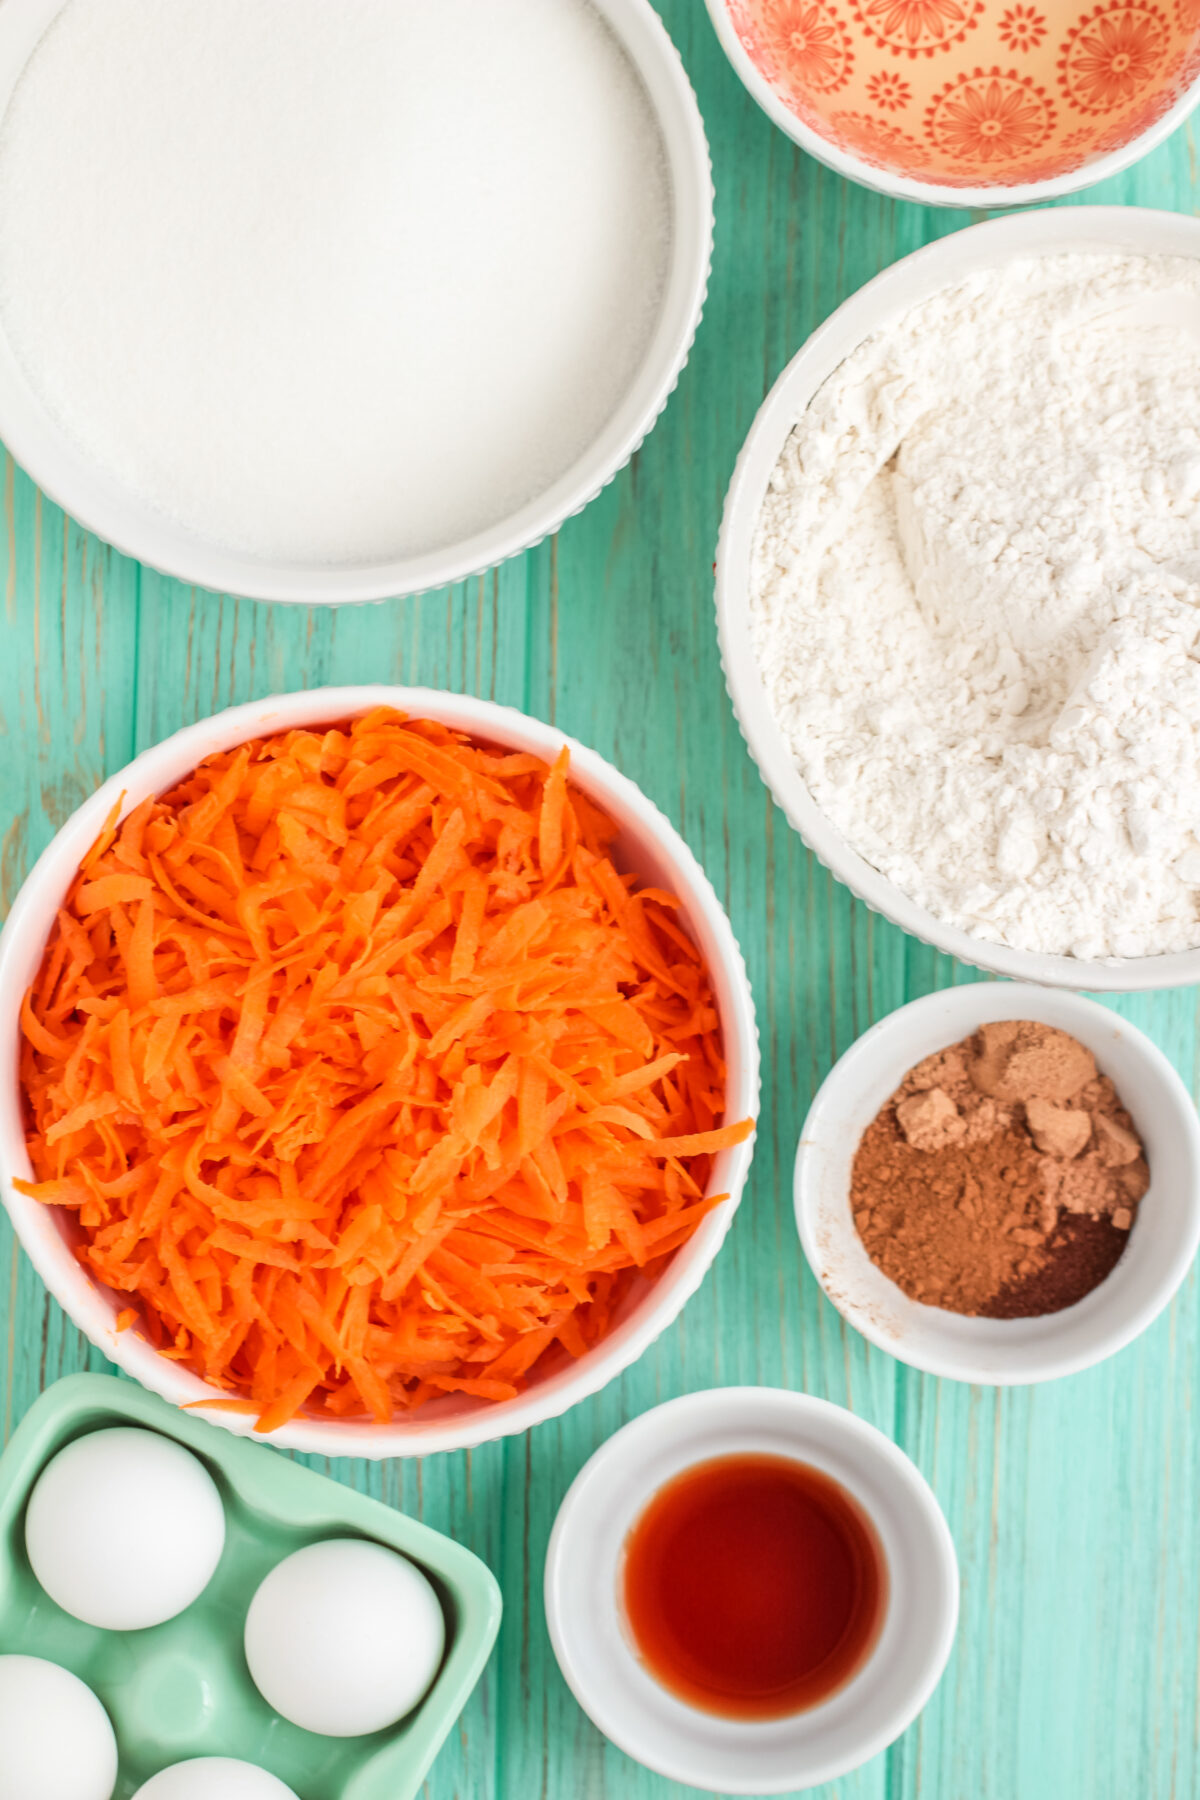 Ingredients for the carrot cake.